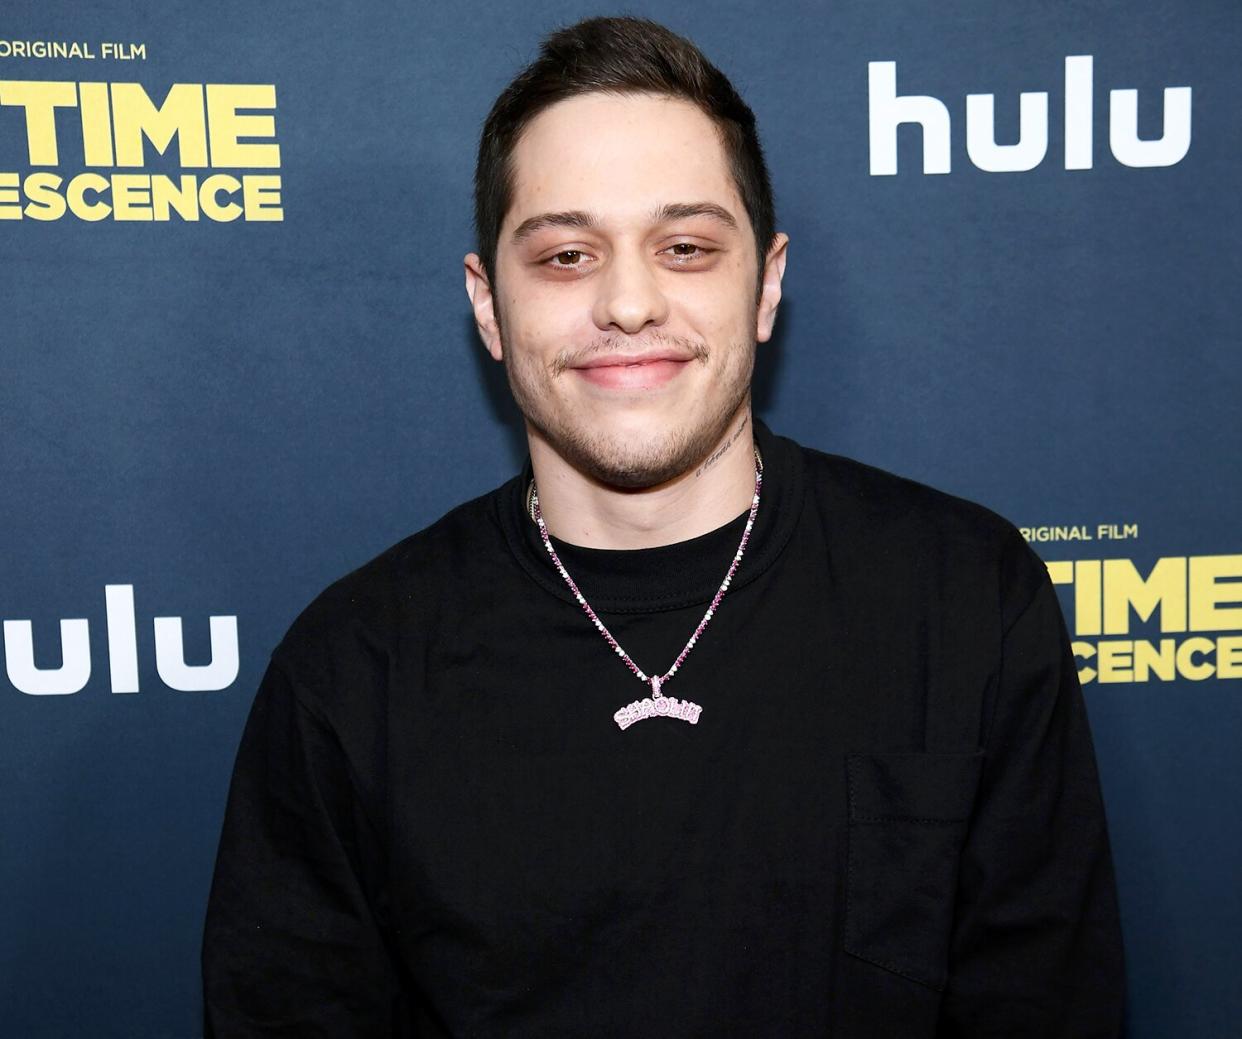 Pete Davidson attends the premiere of "Big Time Adolescence" at Metrograph on March 05, 2020 in New York City.